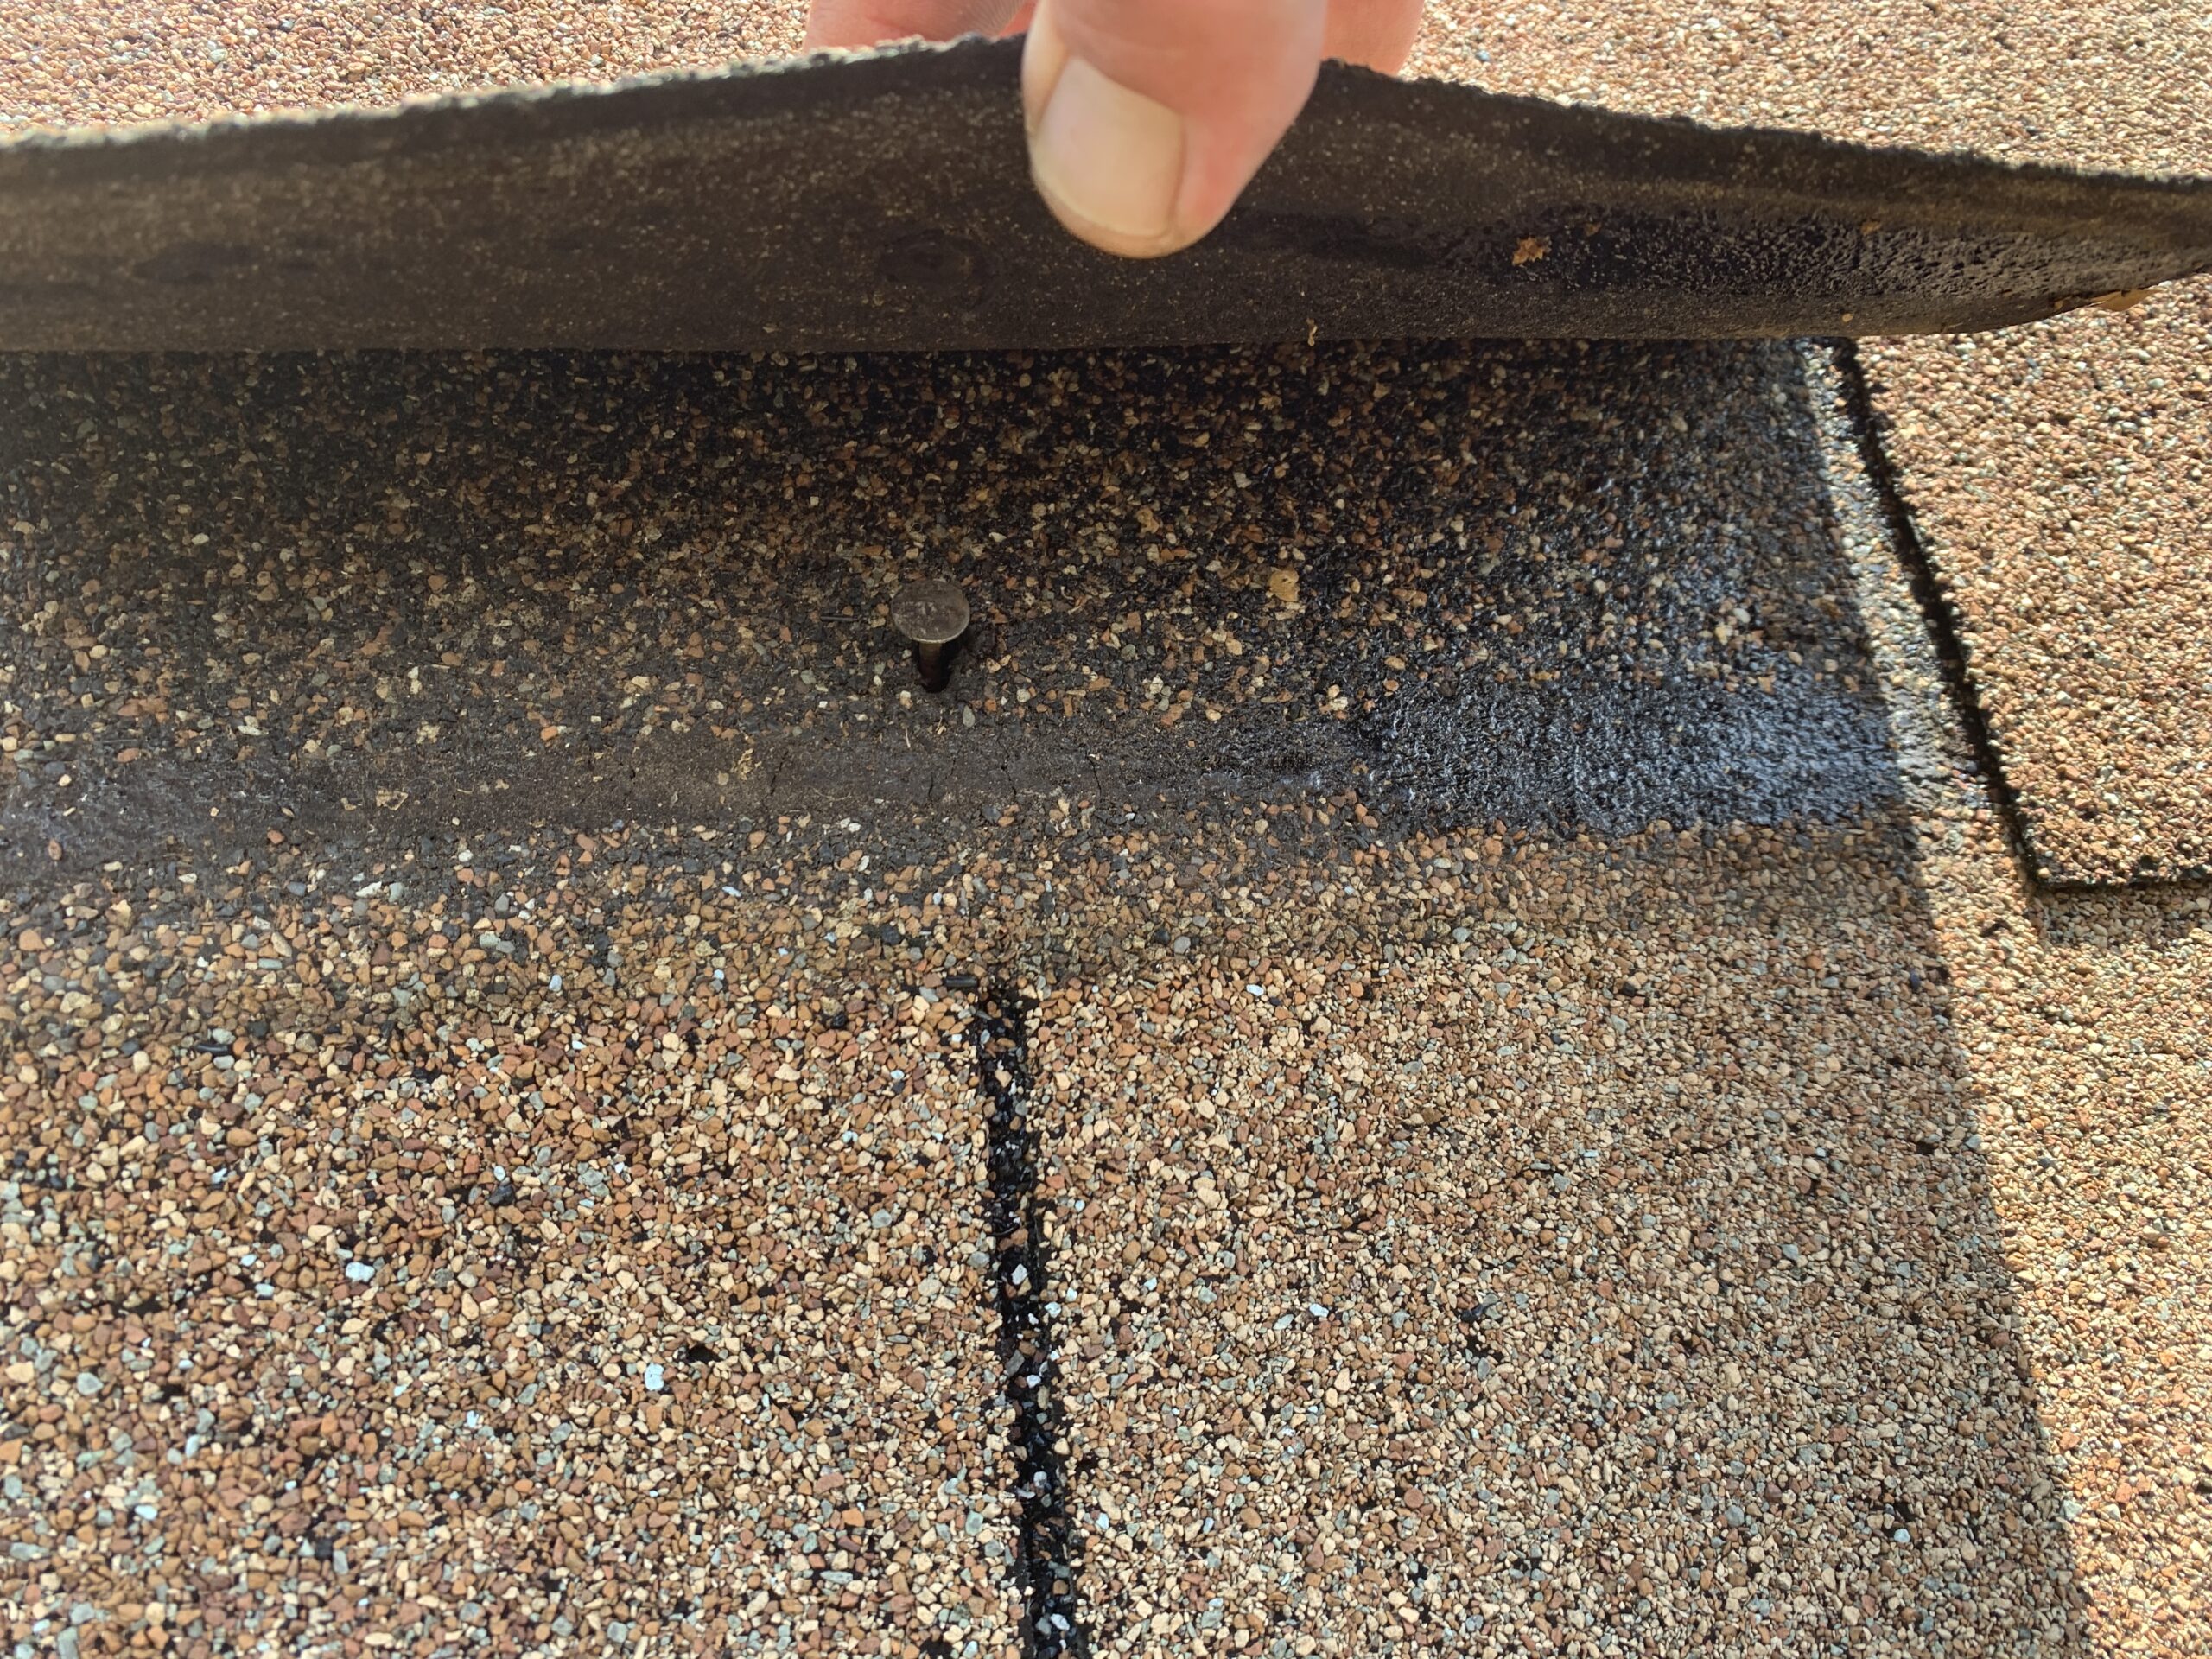 Do you laminated shingles on an old three tab shingle roof in need of replacement. The shingles are no longer glued together at the nail line